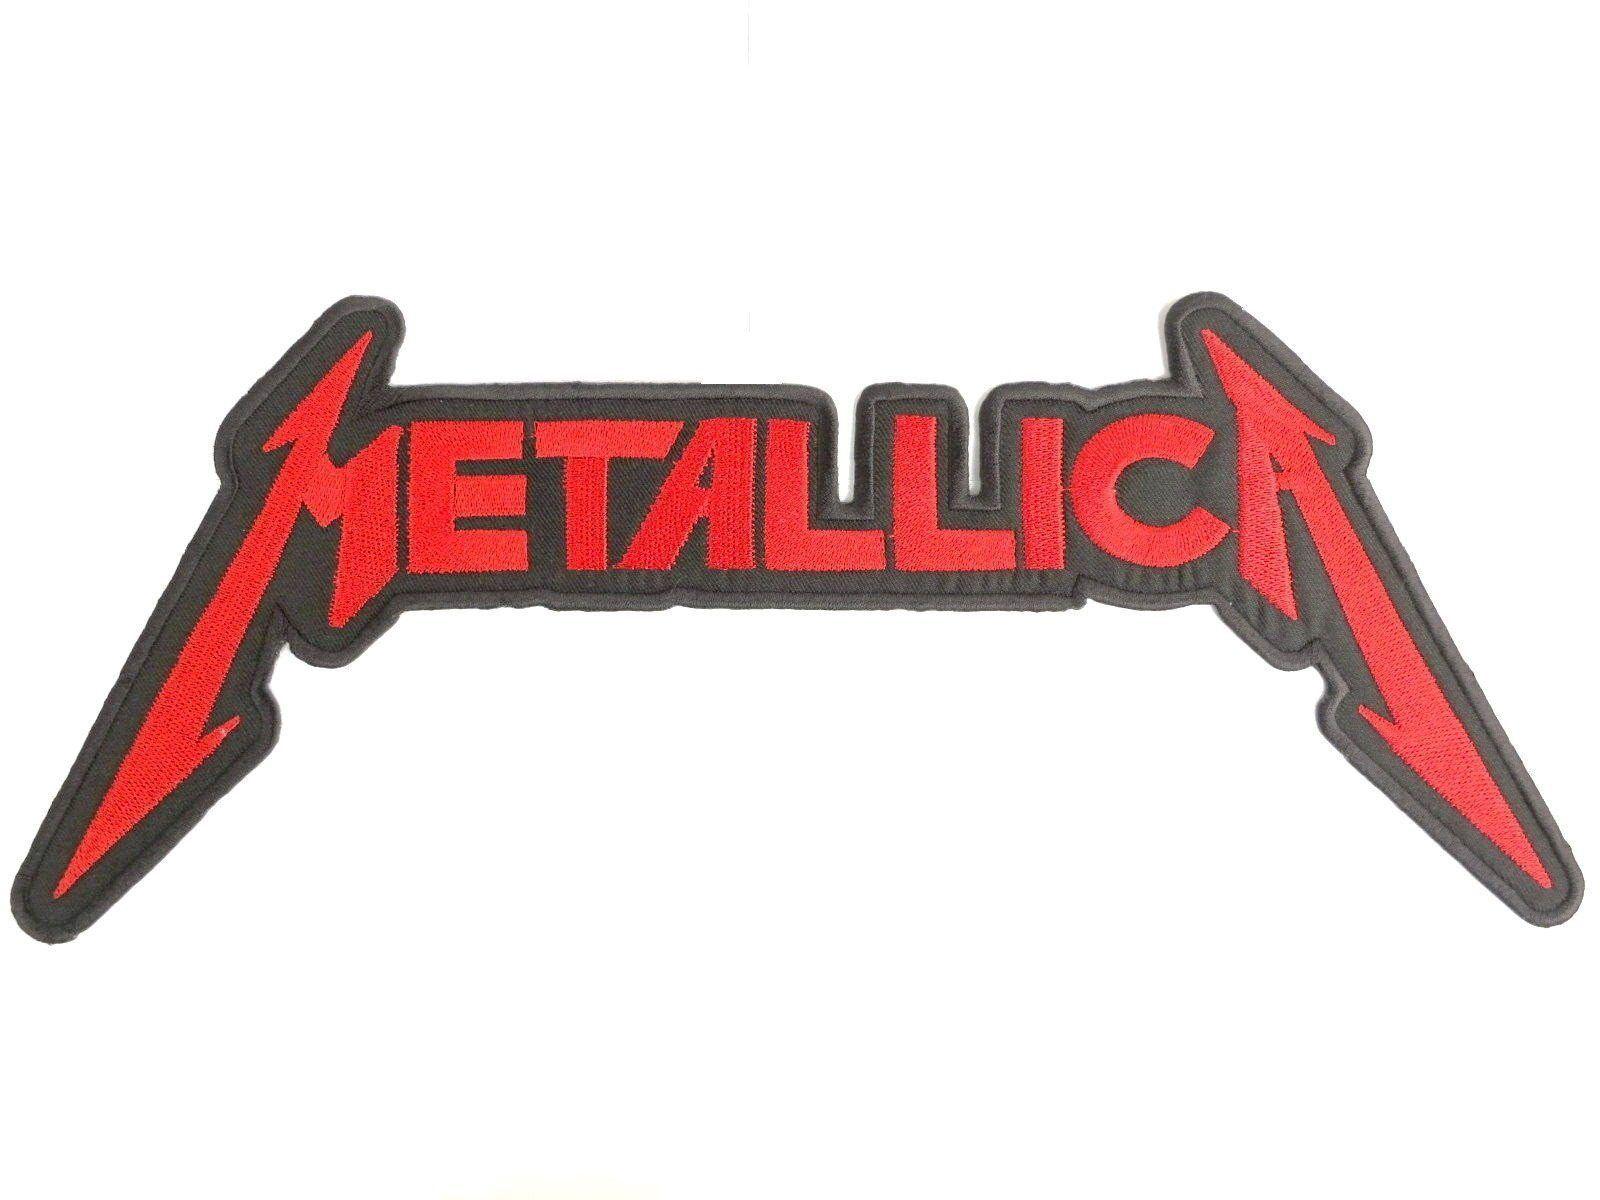 Metallica Red Logo - METALLICA Red Logo Big Embroidered Back Patch 15.4